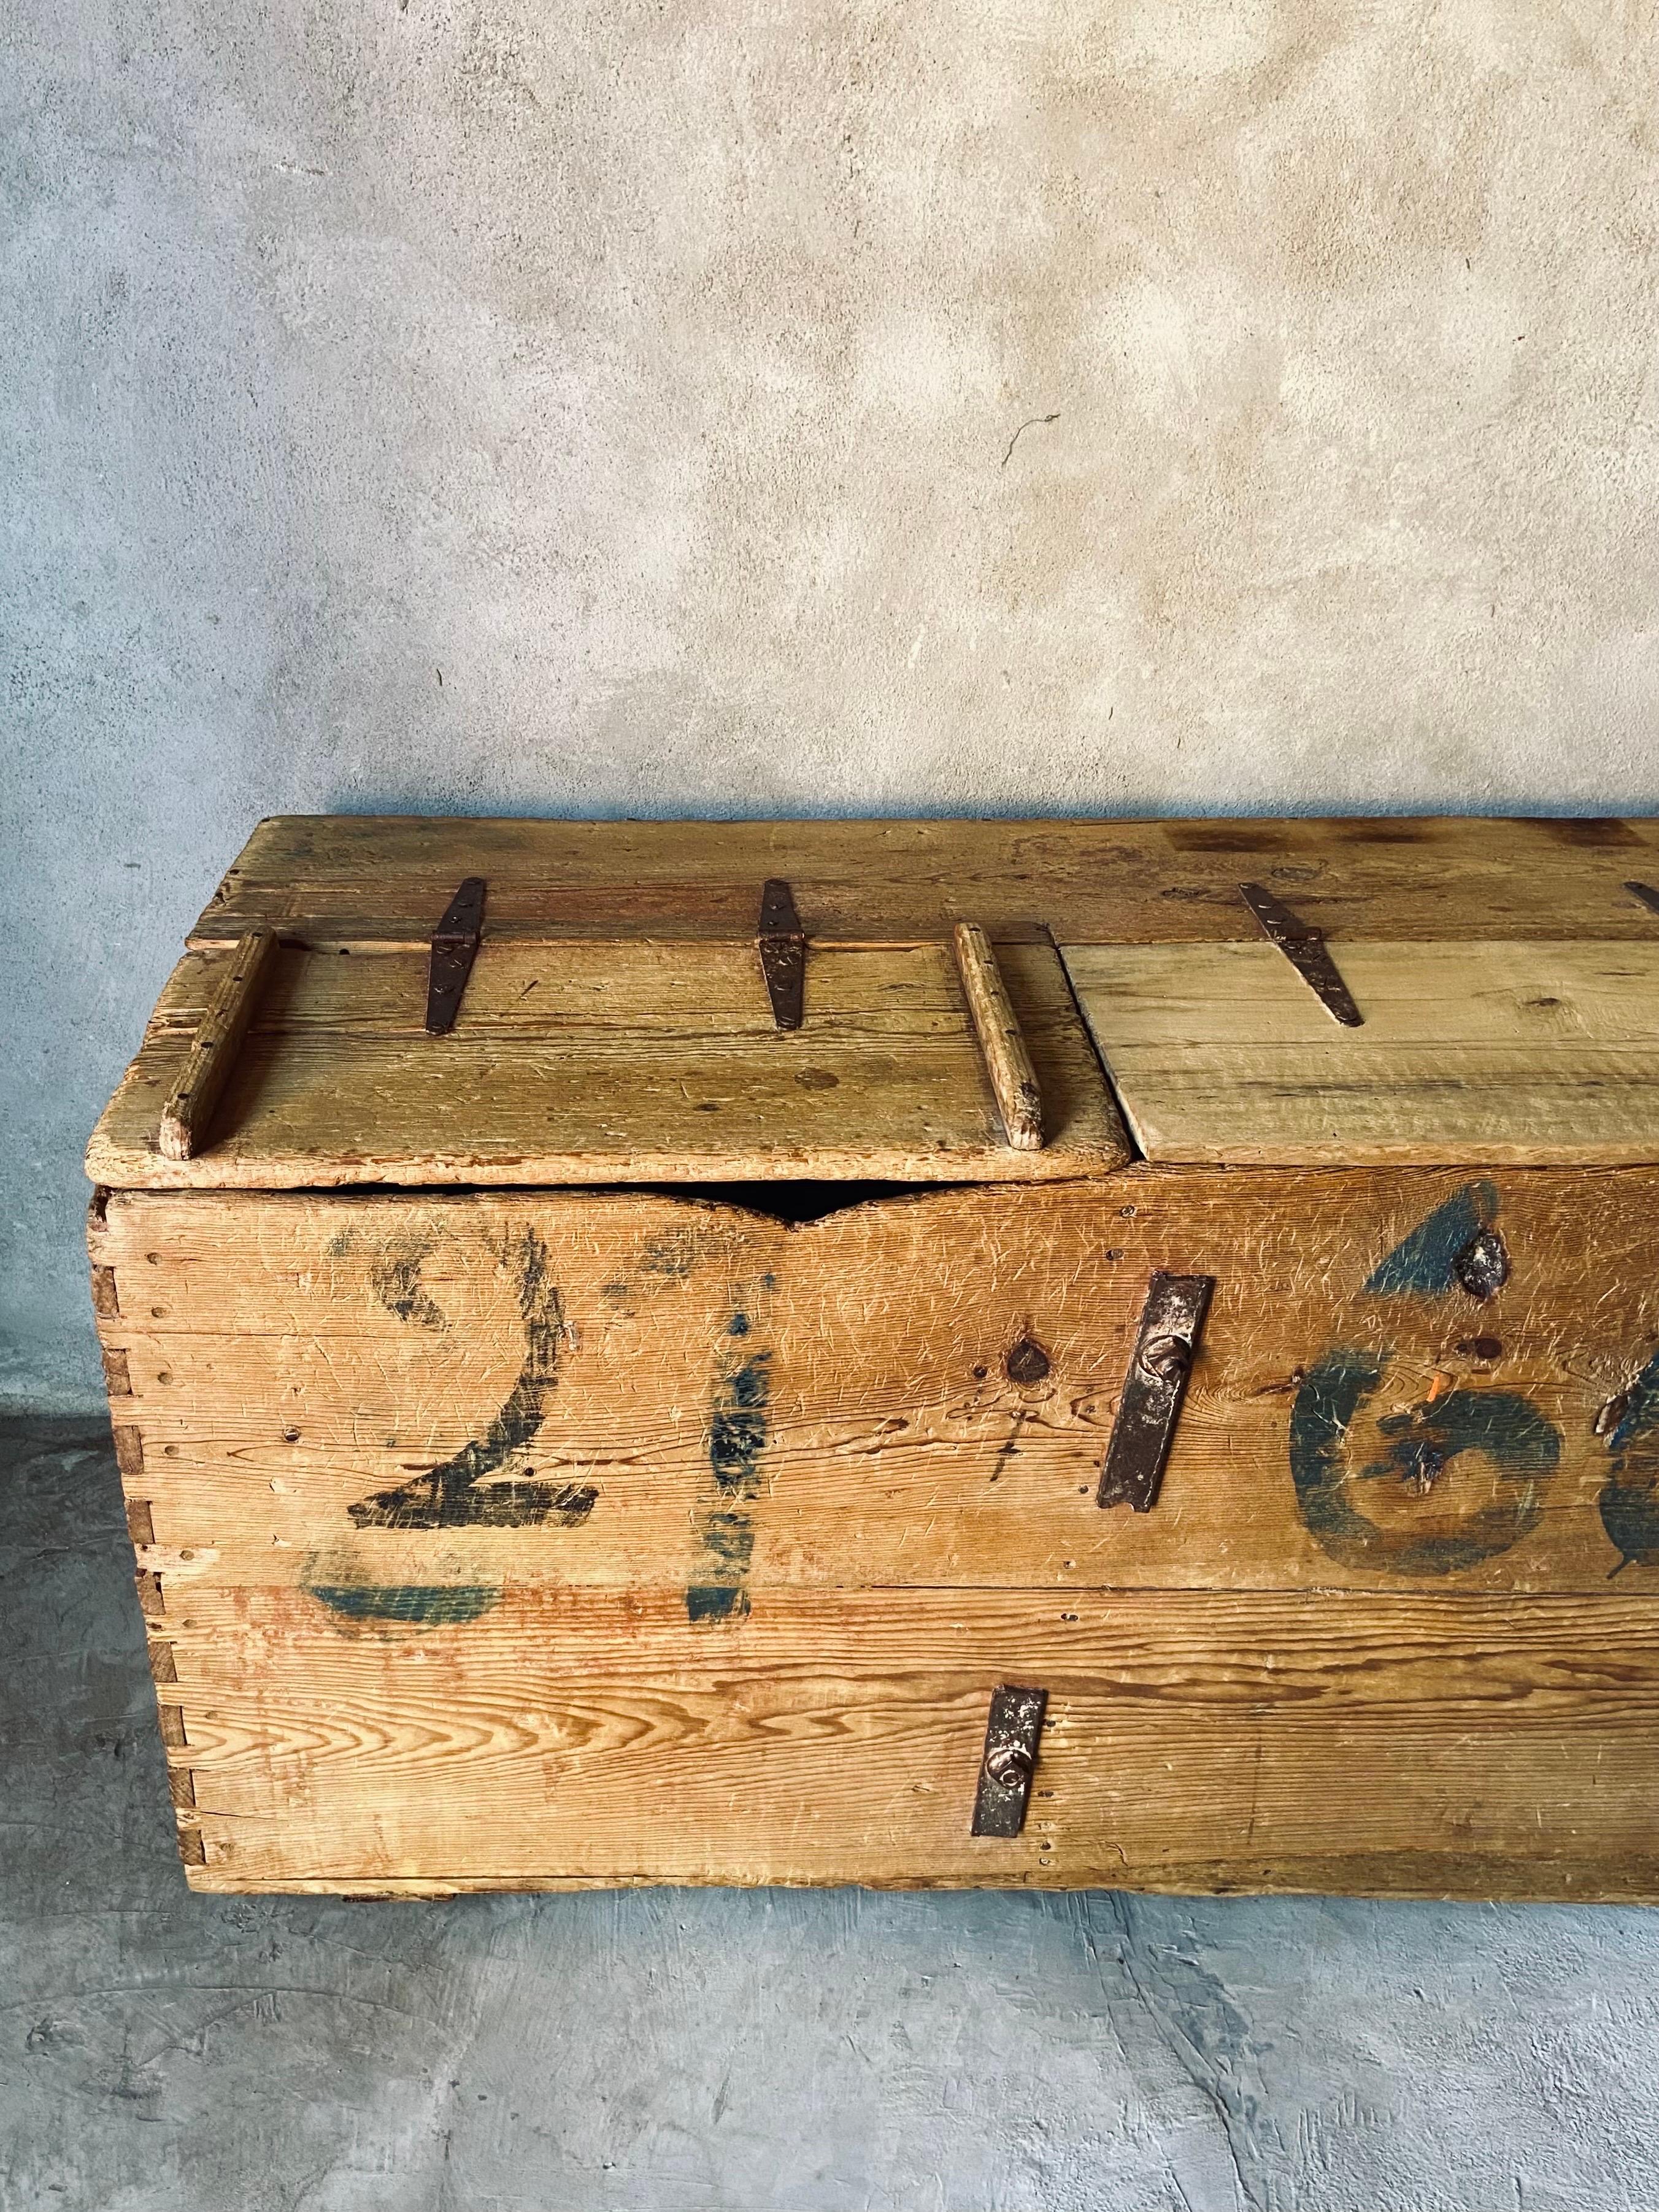 Mid 19th century Mexican colonial storage chest from the Sierra Gorda of Queretaro, Mexico. Made from Sabino wood which is similar to White Cypress. The trunk was secured at a later date in the interior with rods, most likely in the 50´s or 60´s